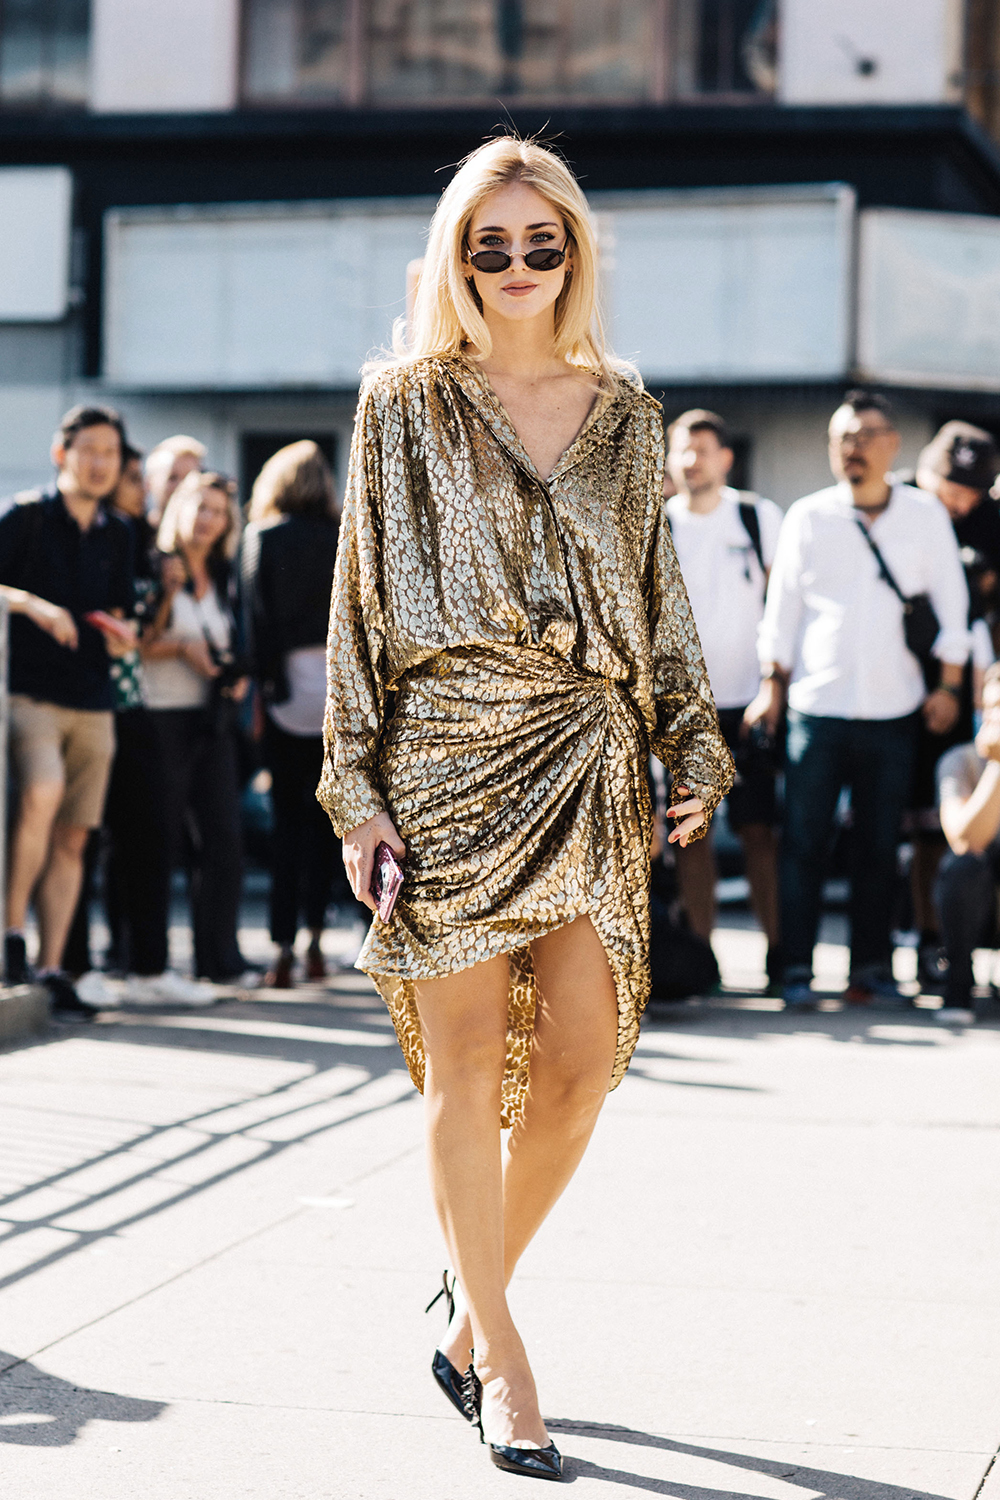 20 Black-And-Gold Outfits To Wear Now | Who What Wear